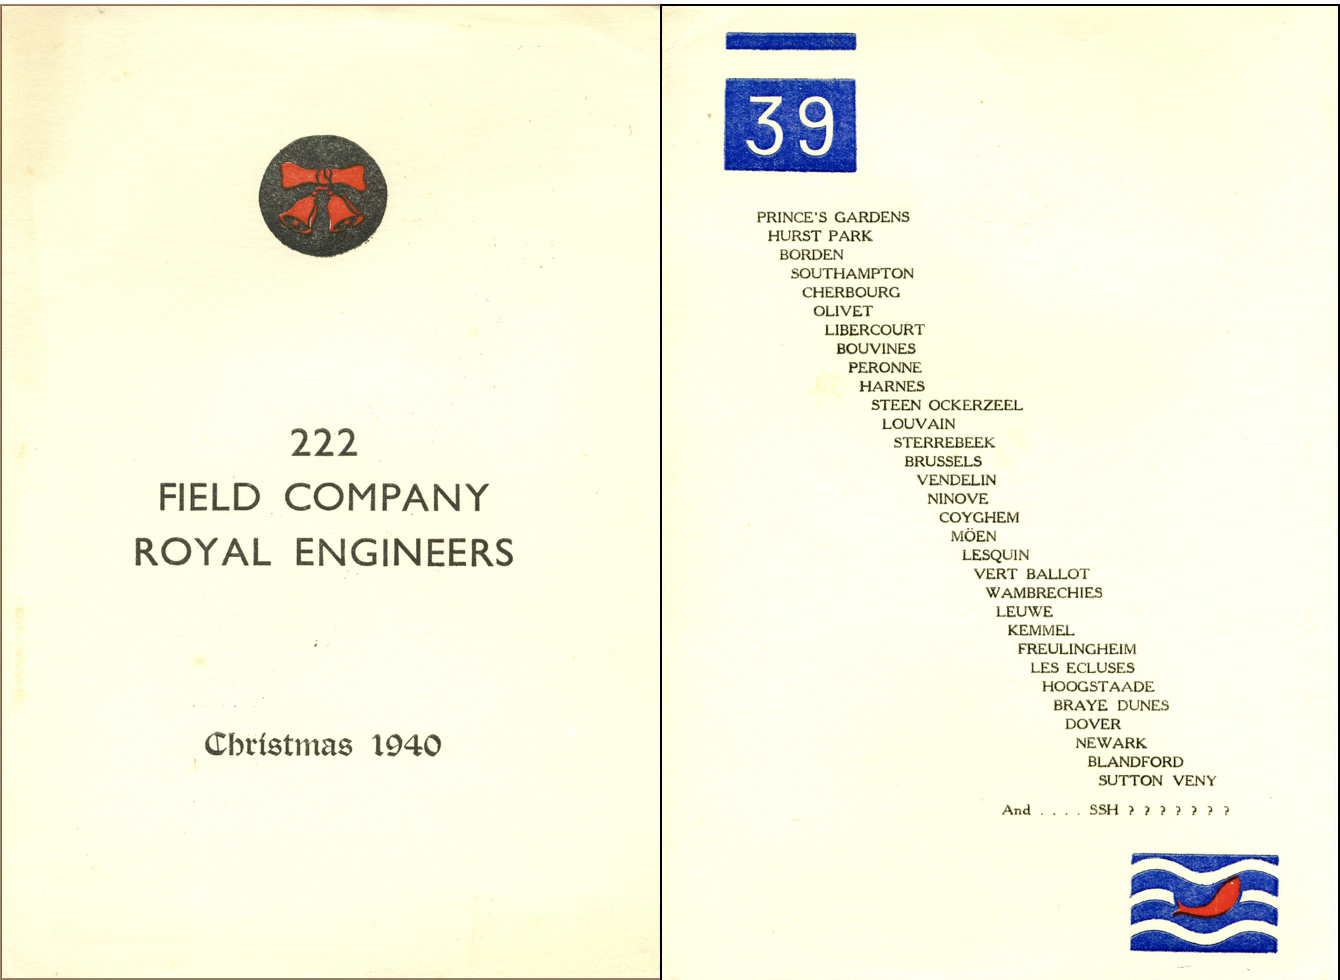 1940 xmas card from 222 Fd. Coy.